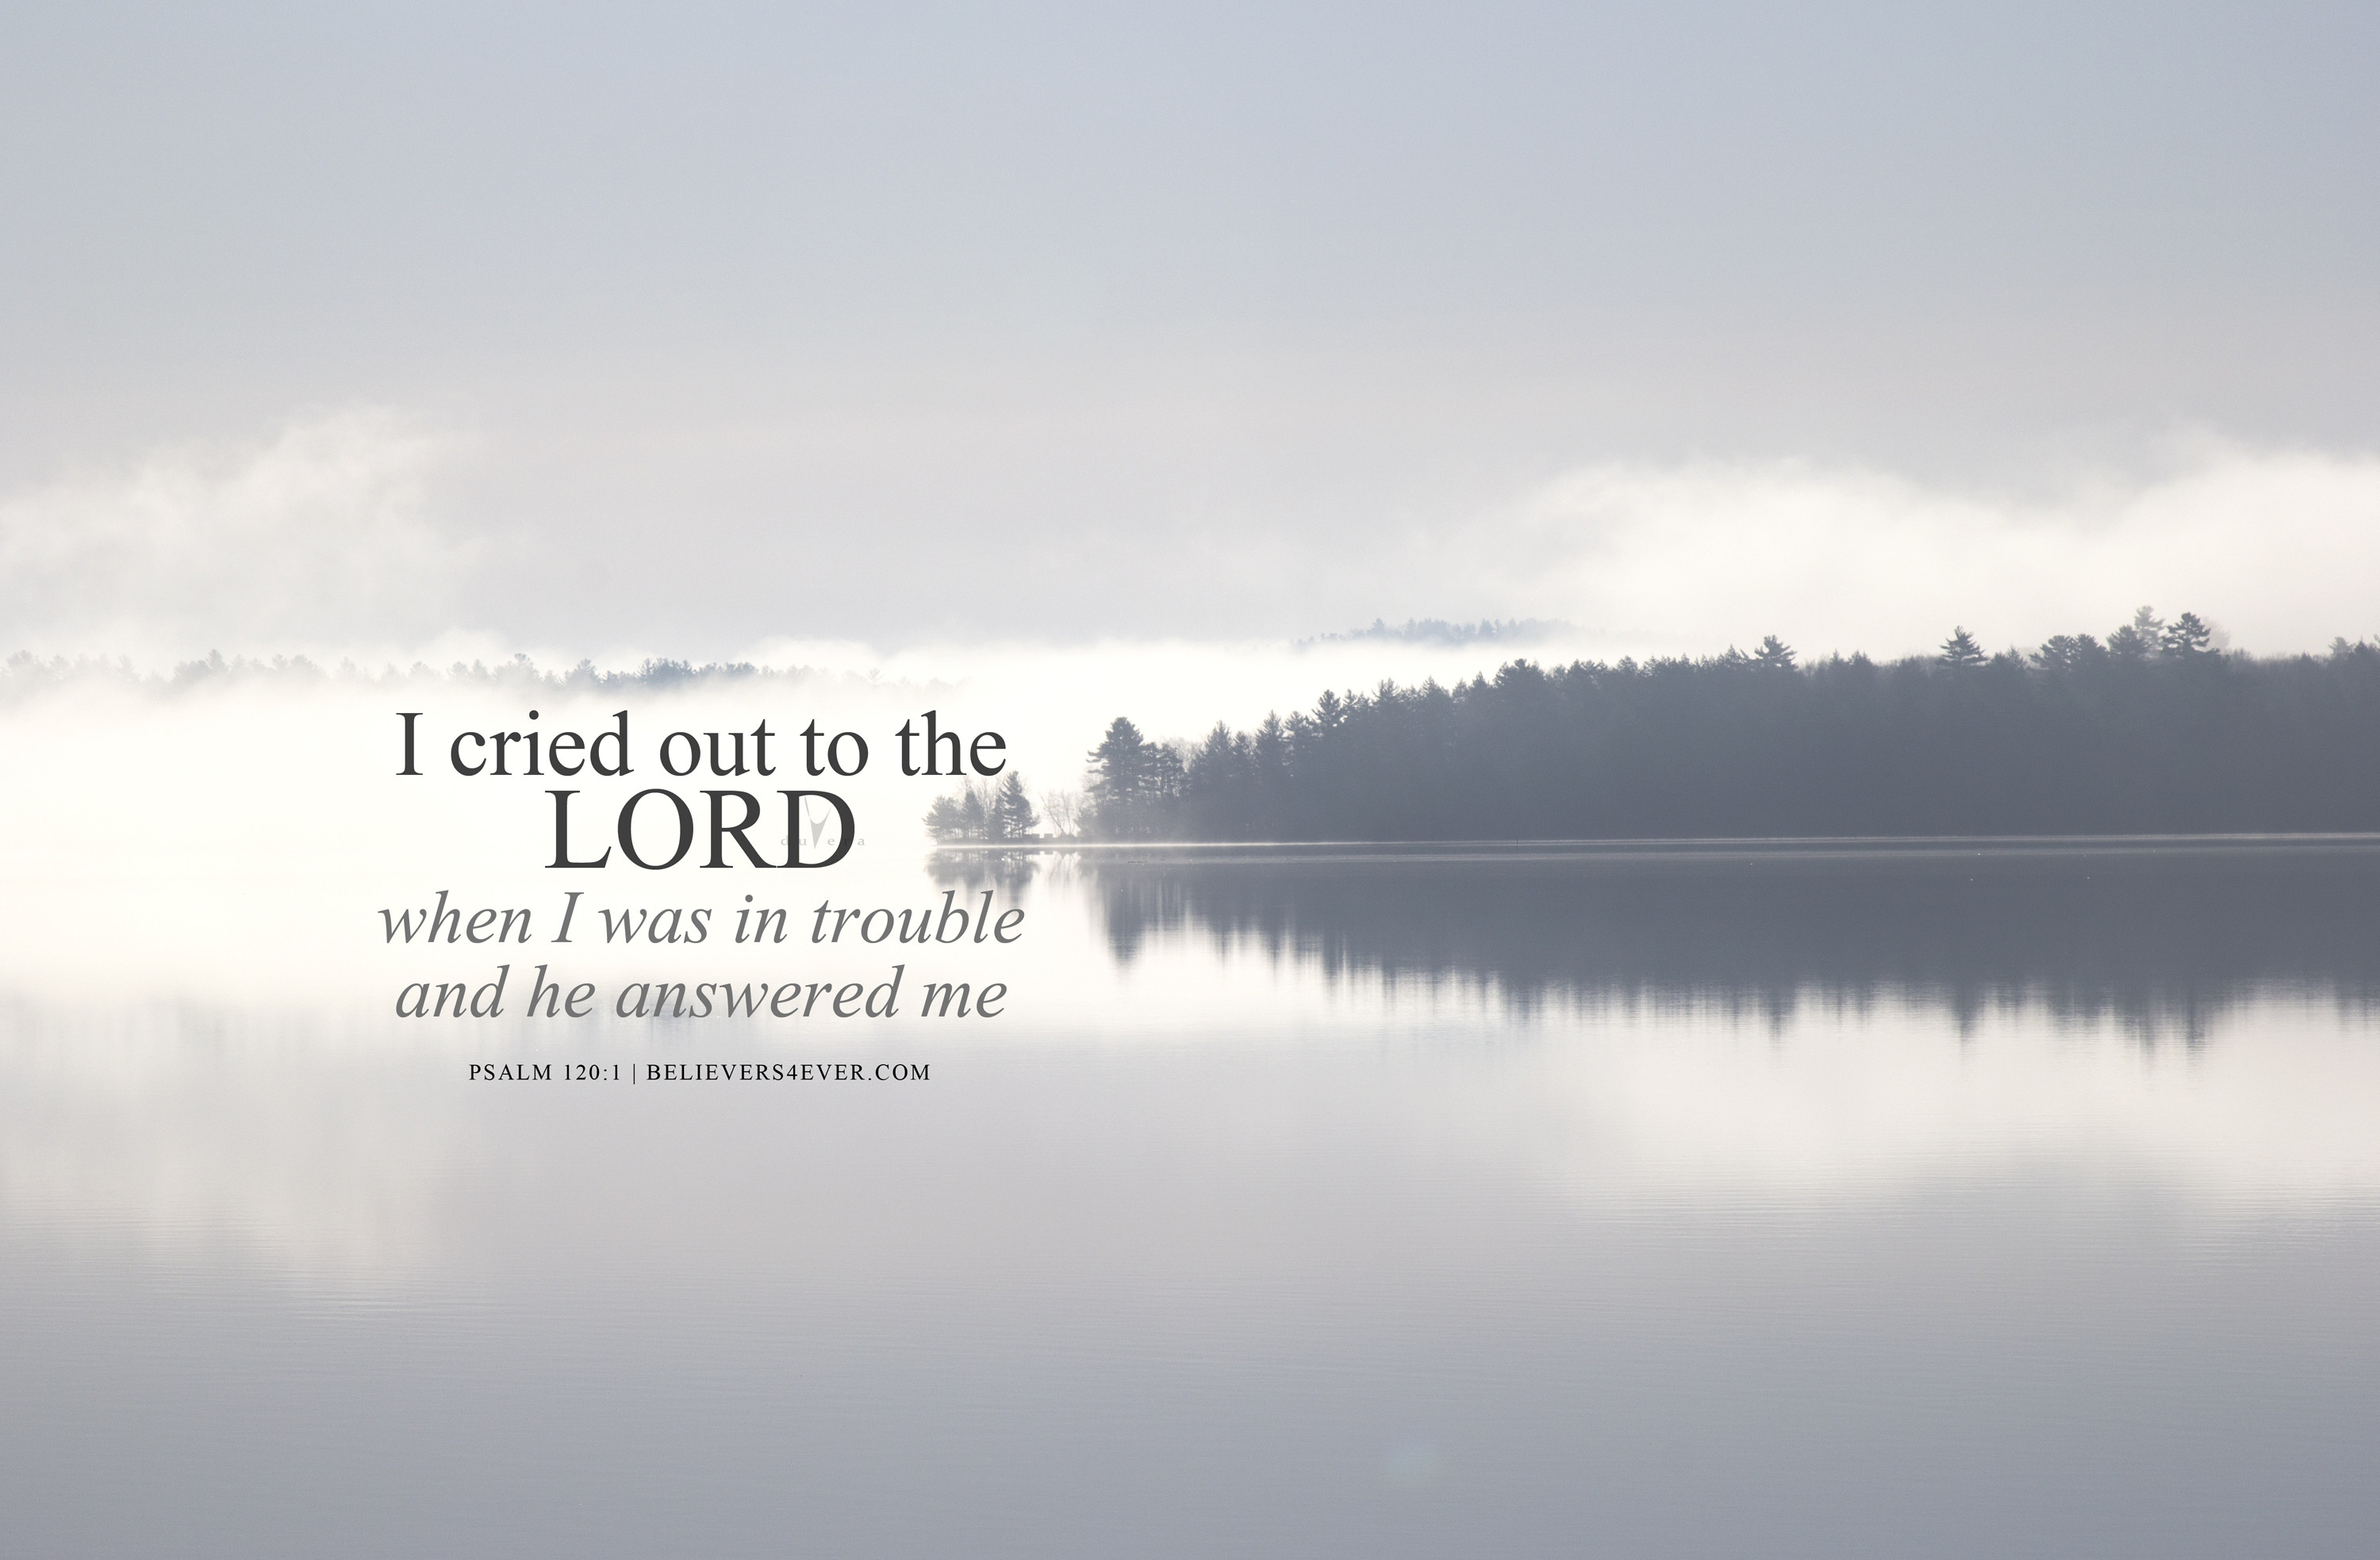 Christian desktop wallpaper with bible verse. Use for church sermons and more. I cried